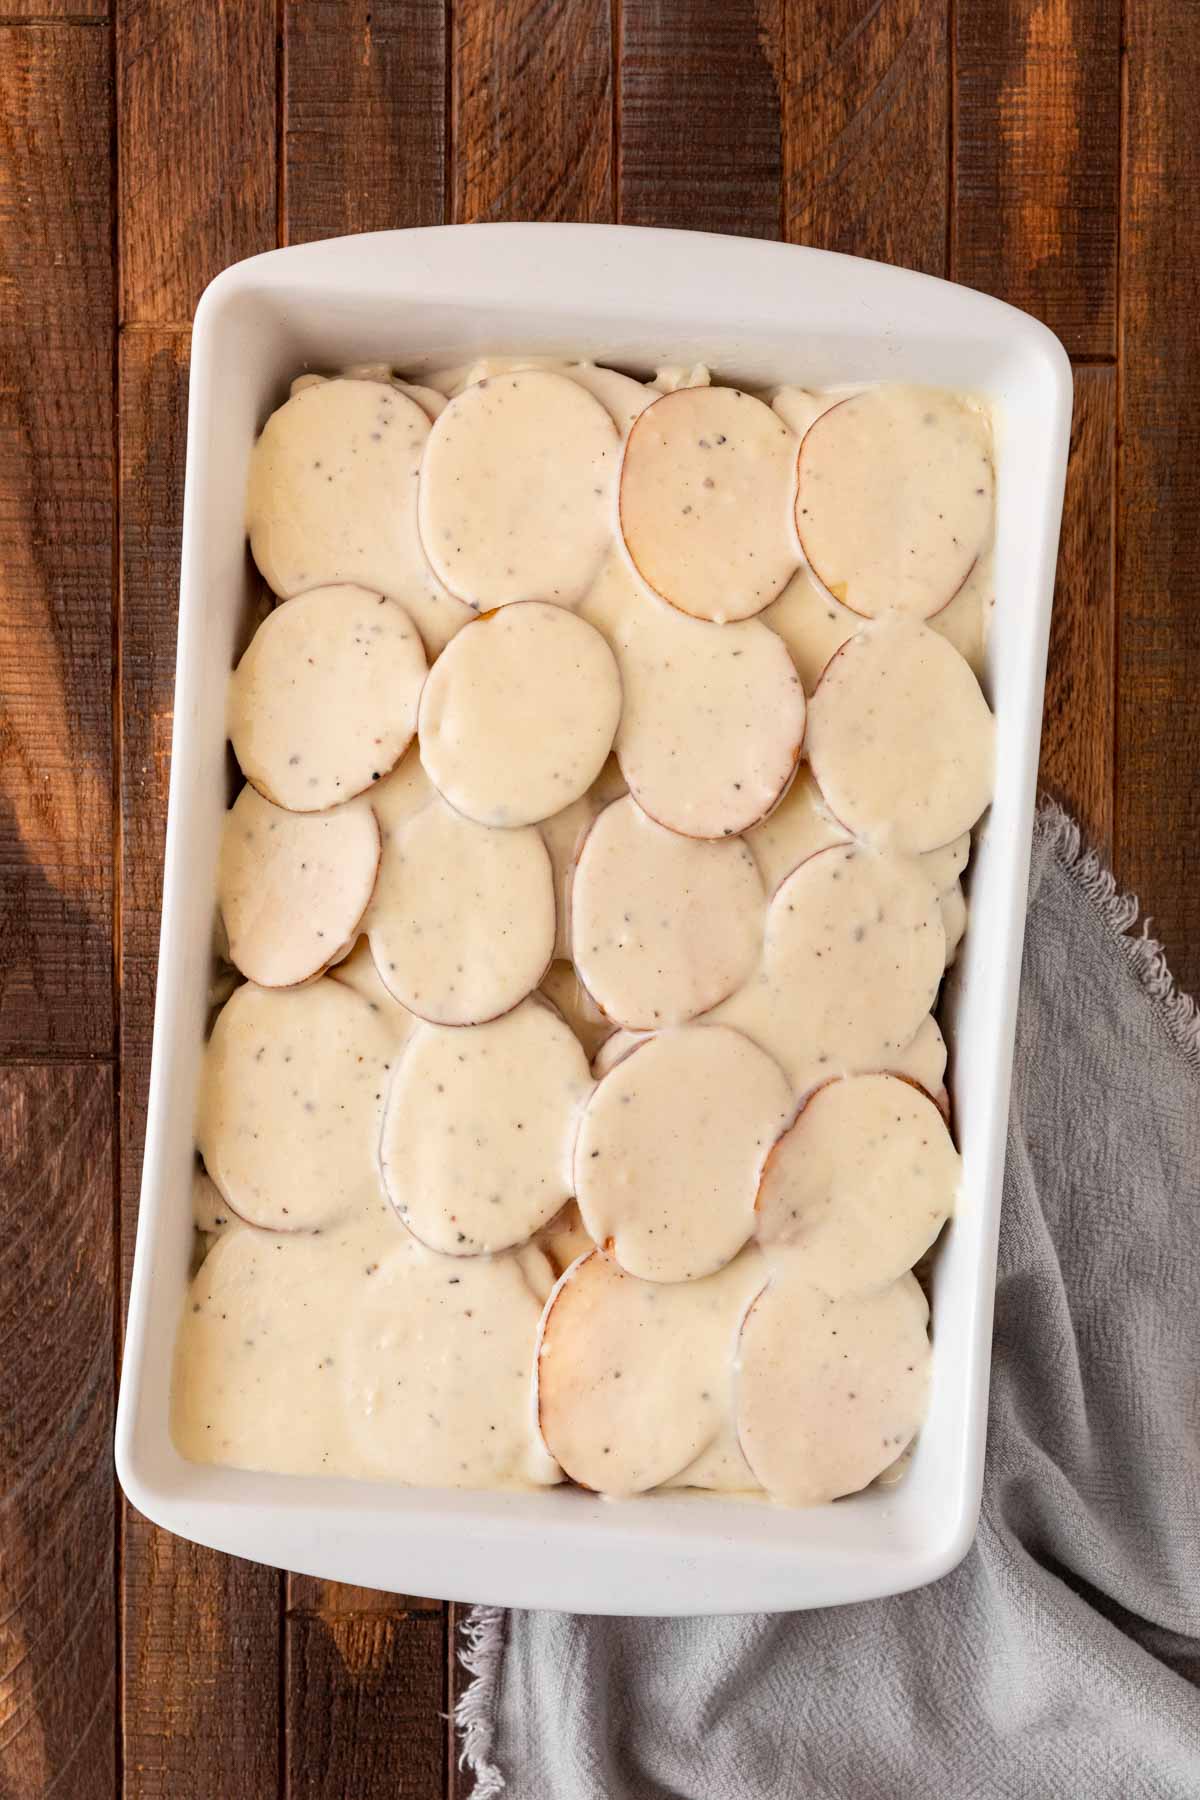 Scalloped Potatoes and Ham béchamel sauce added to baking pan